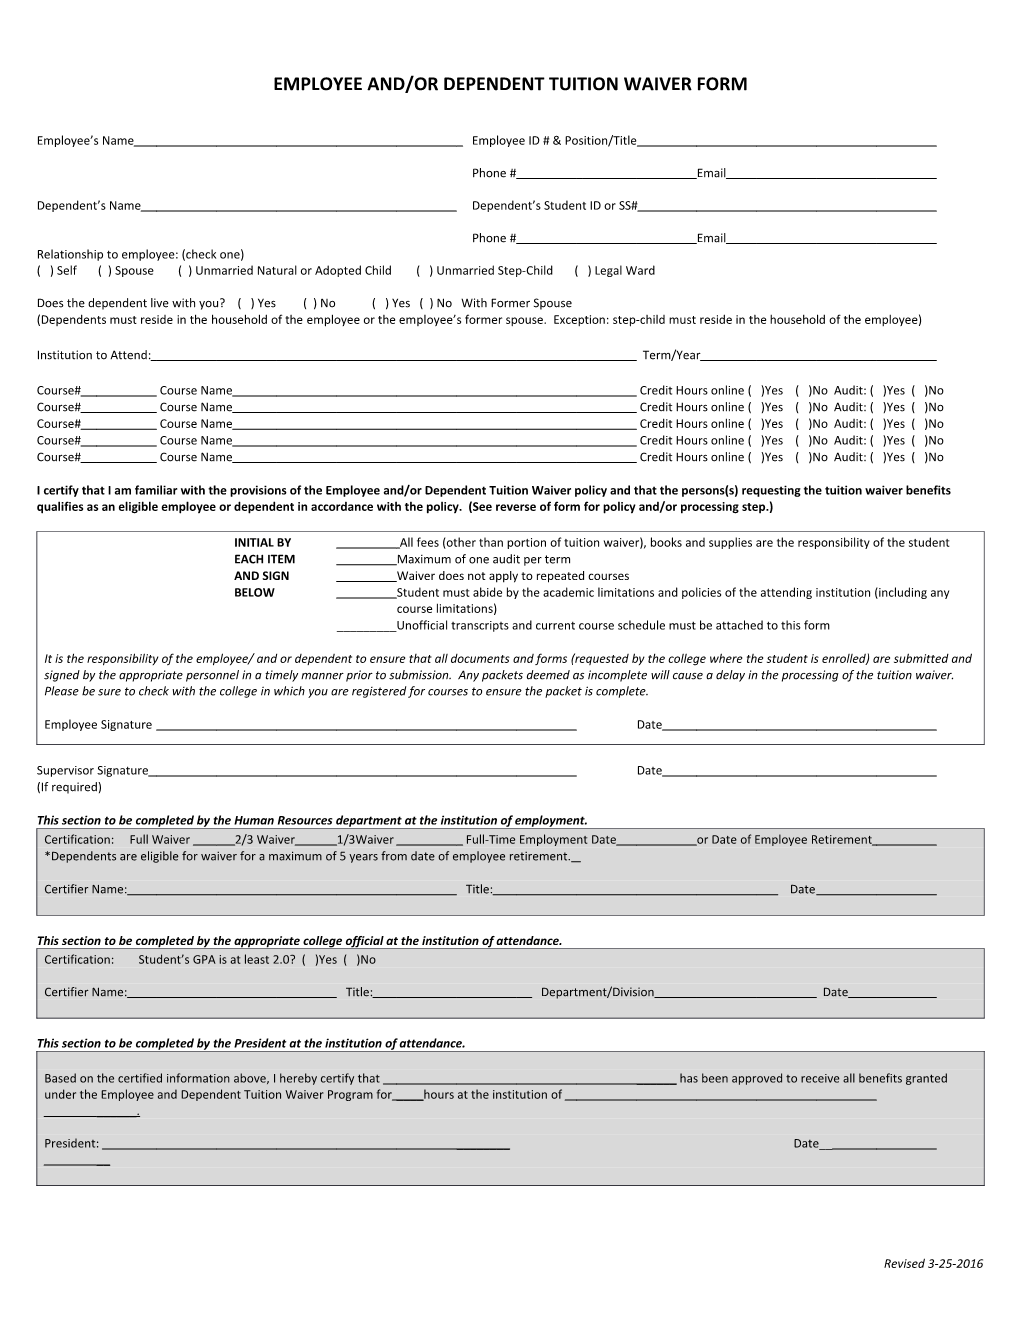 Employee And/Or Dependent Tuition Waiver Form